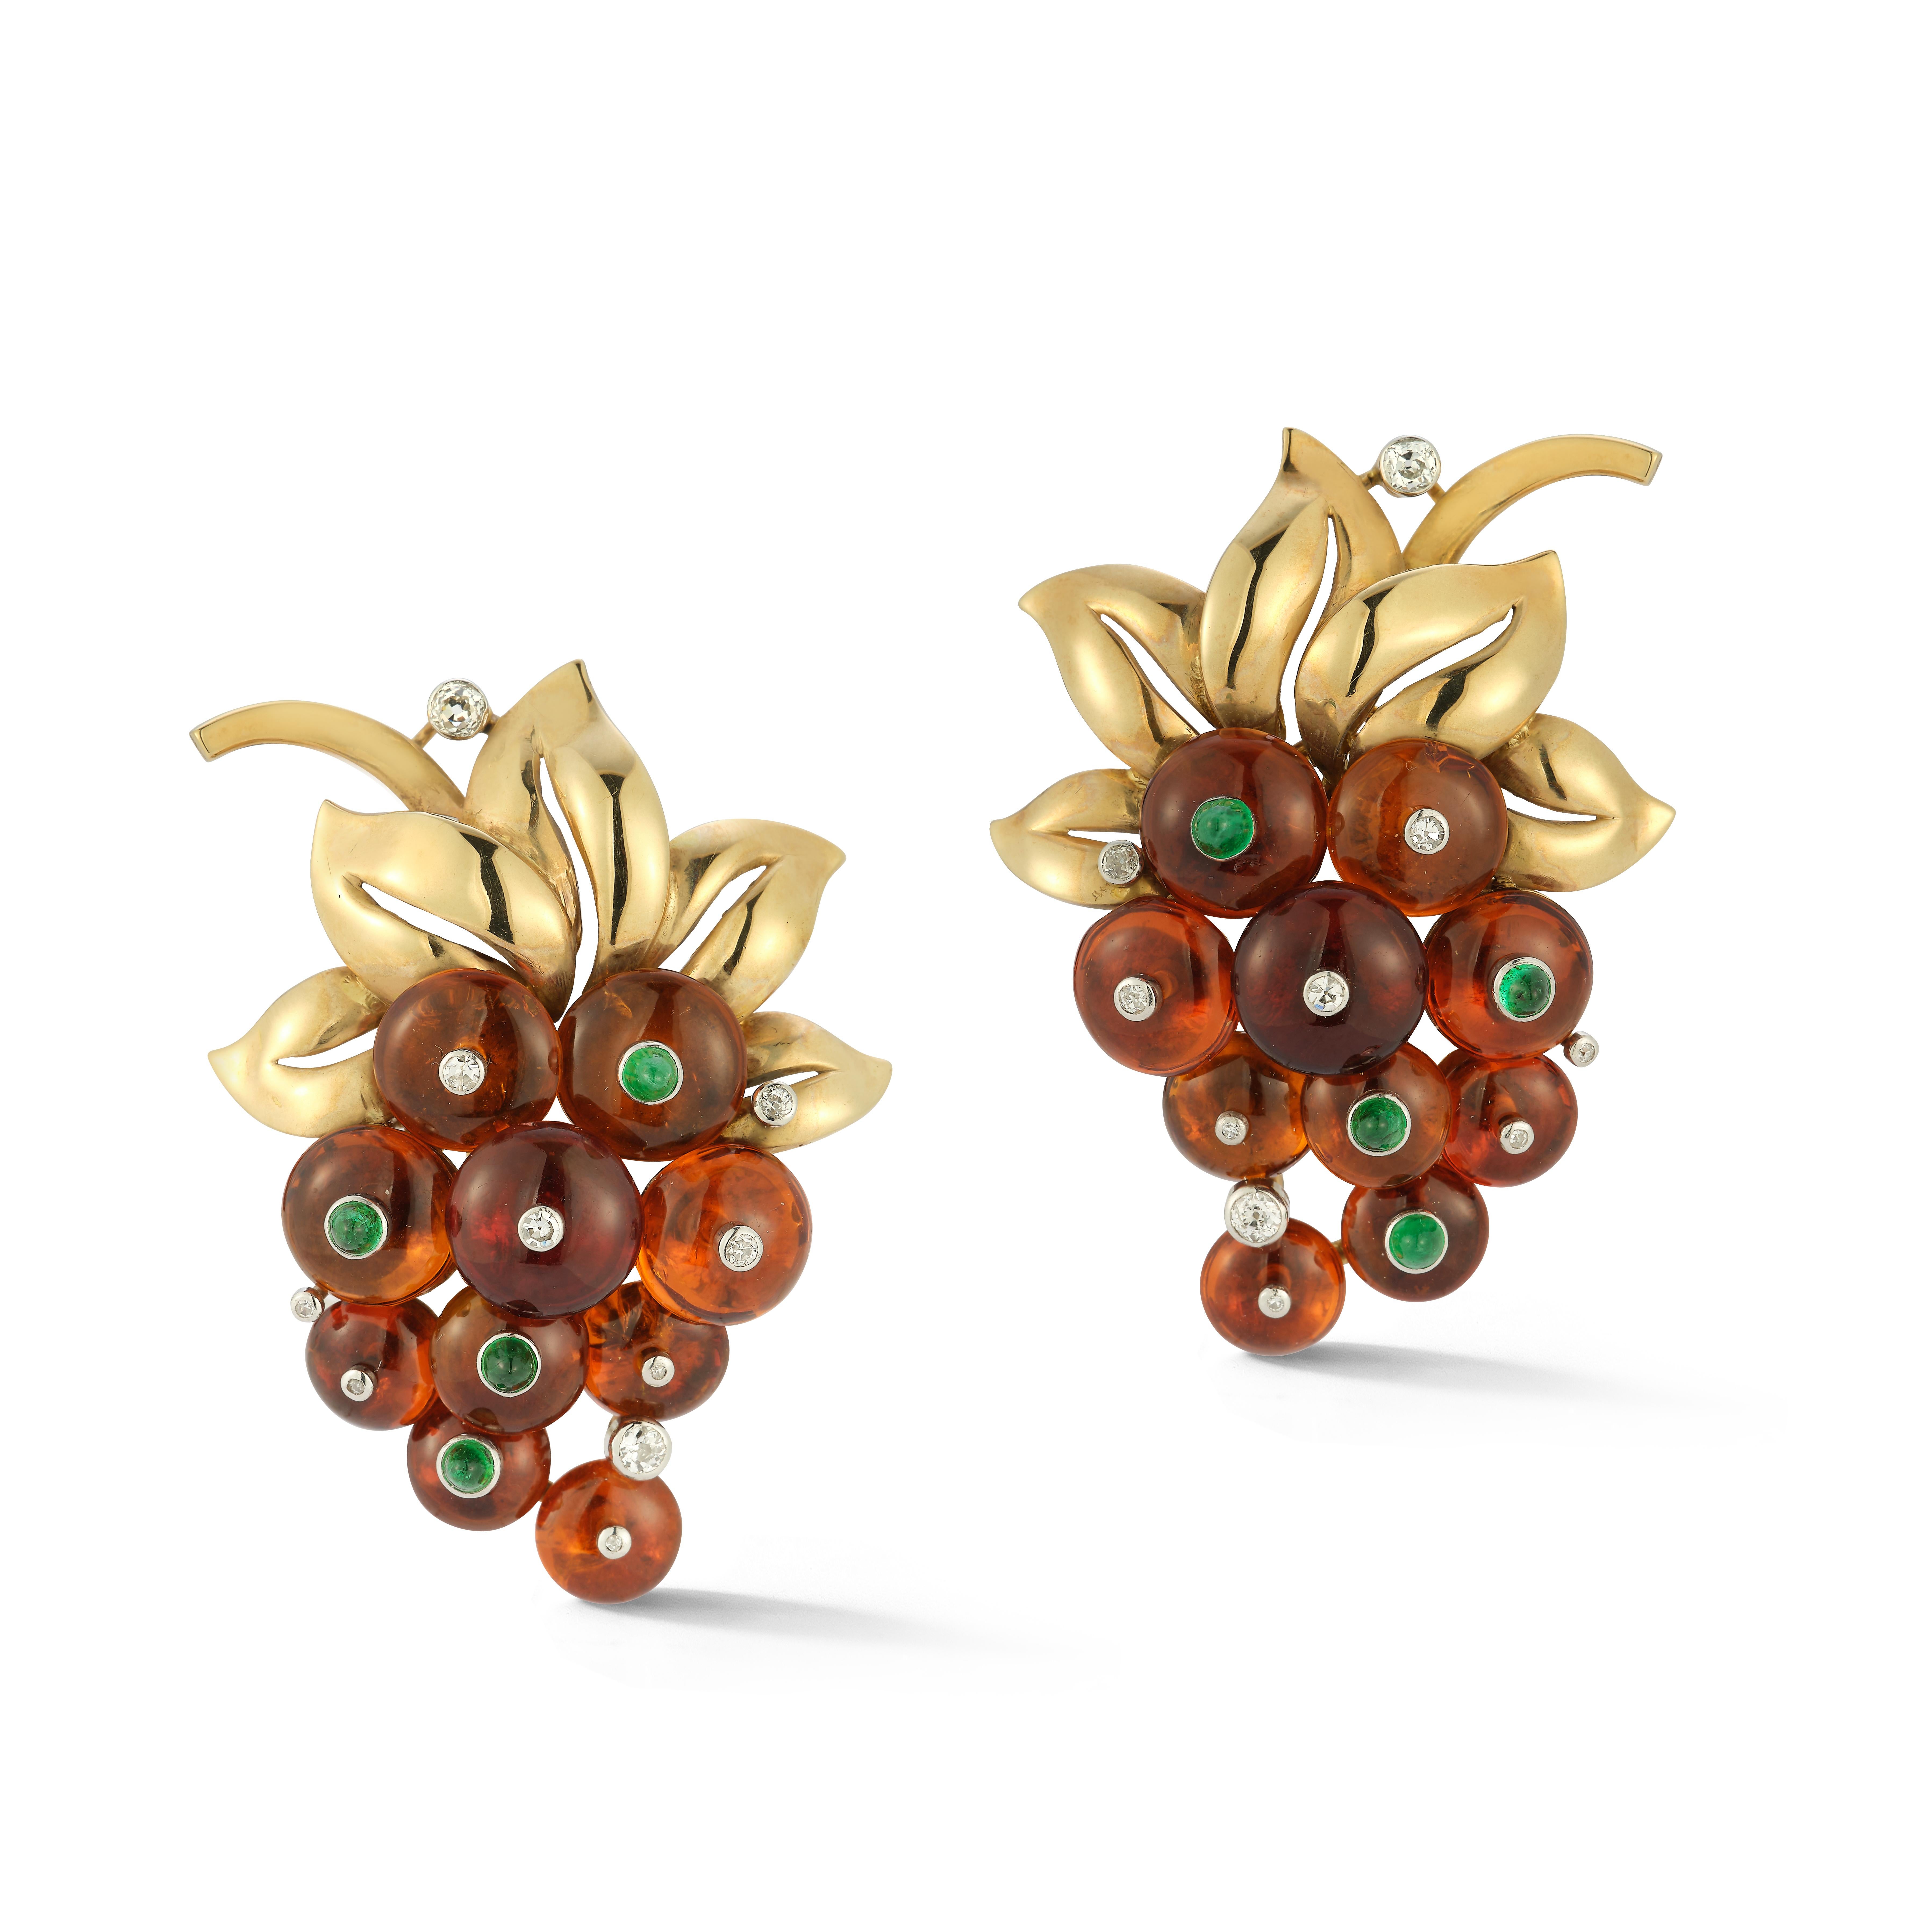 Cartier Retro Citrine Grape Cluster Earrings

A pair of yellow gold earrings set with 20 cabochon citrines and set with by 8 cabochon emeralds and 20 round diamonds.

Signed Cartier London & numbered

Back Type: Clip-on

Measurements: 2